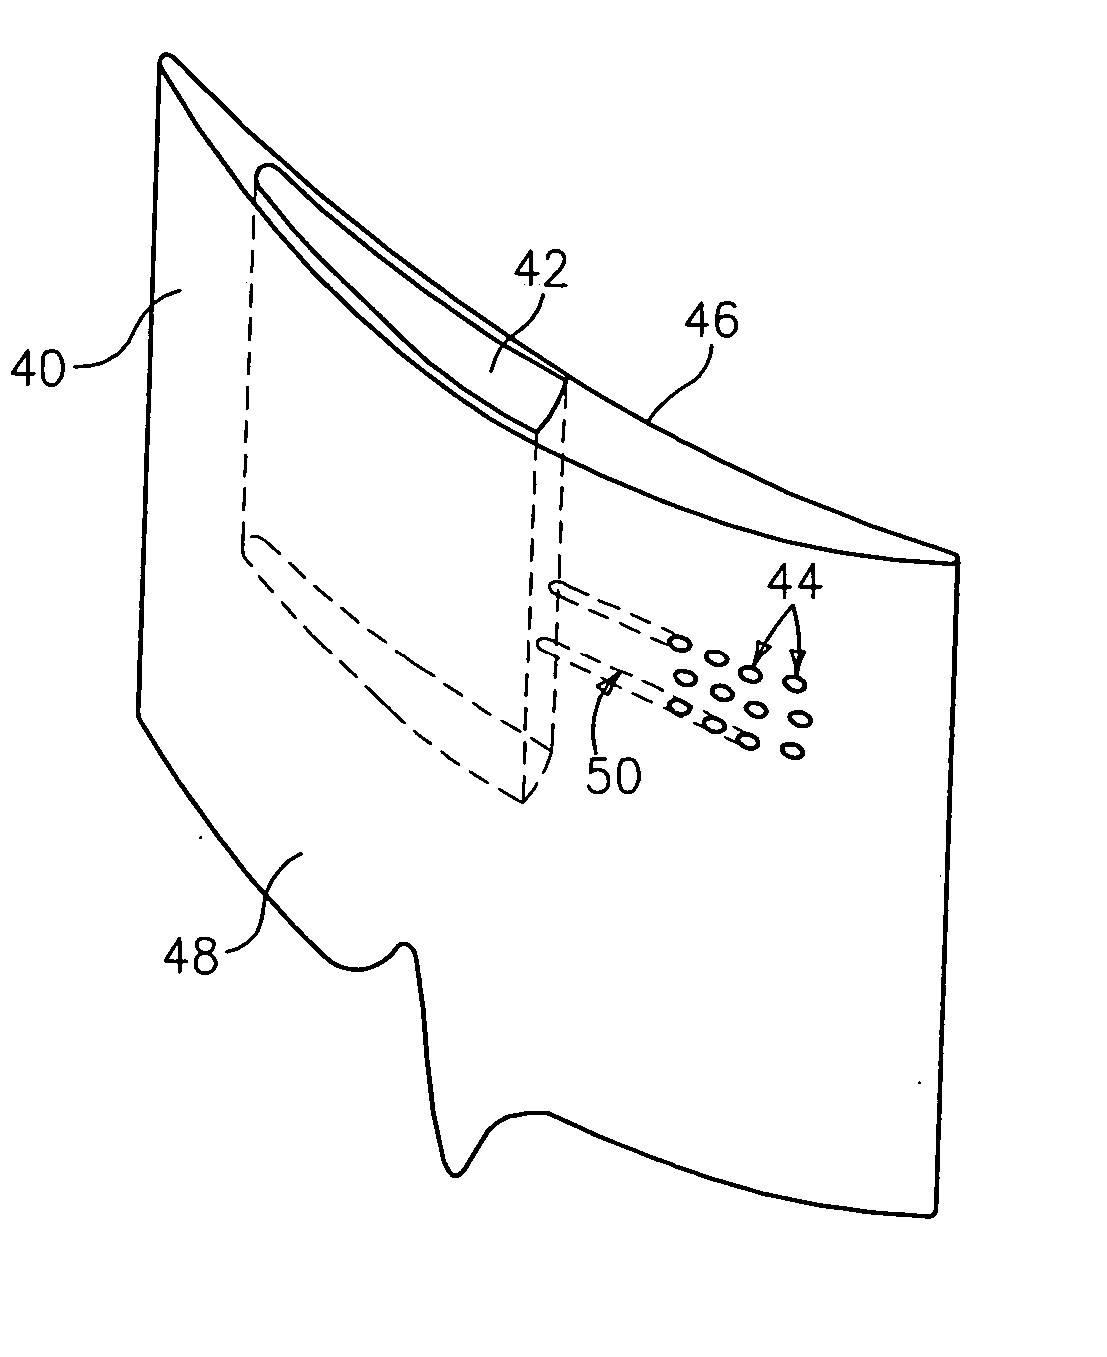 Airfoil surface impedance modification for noise reduction in turbofan engines